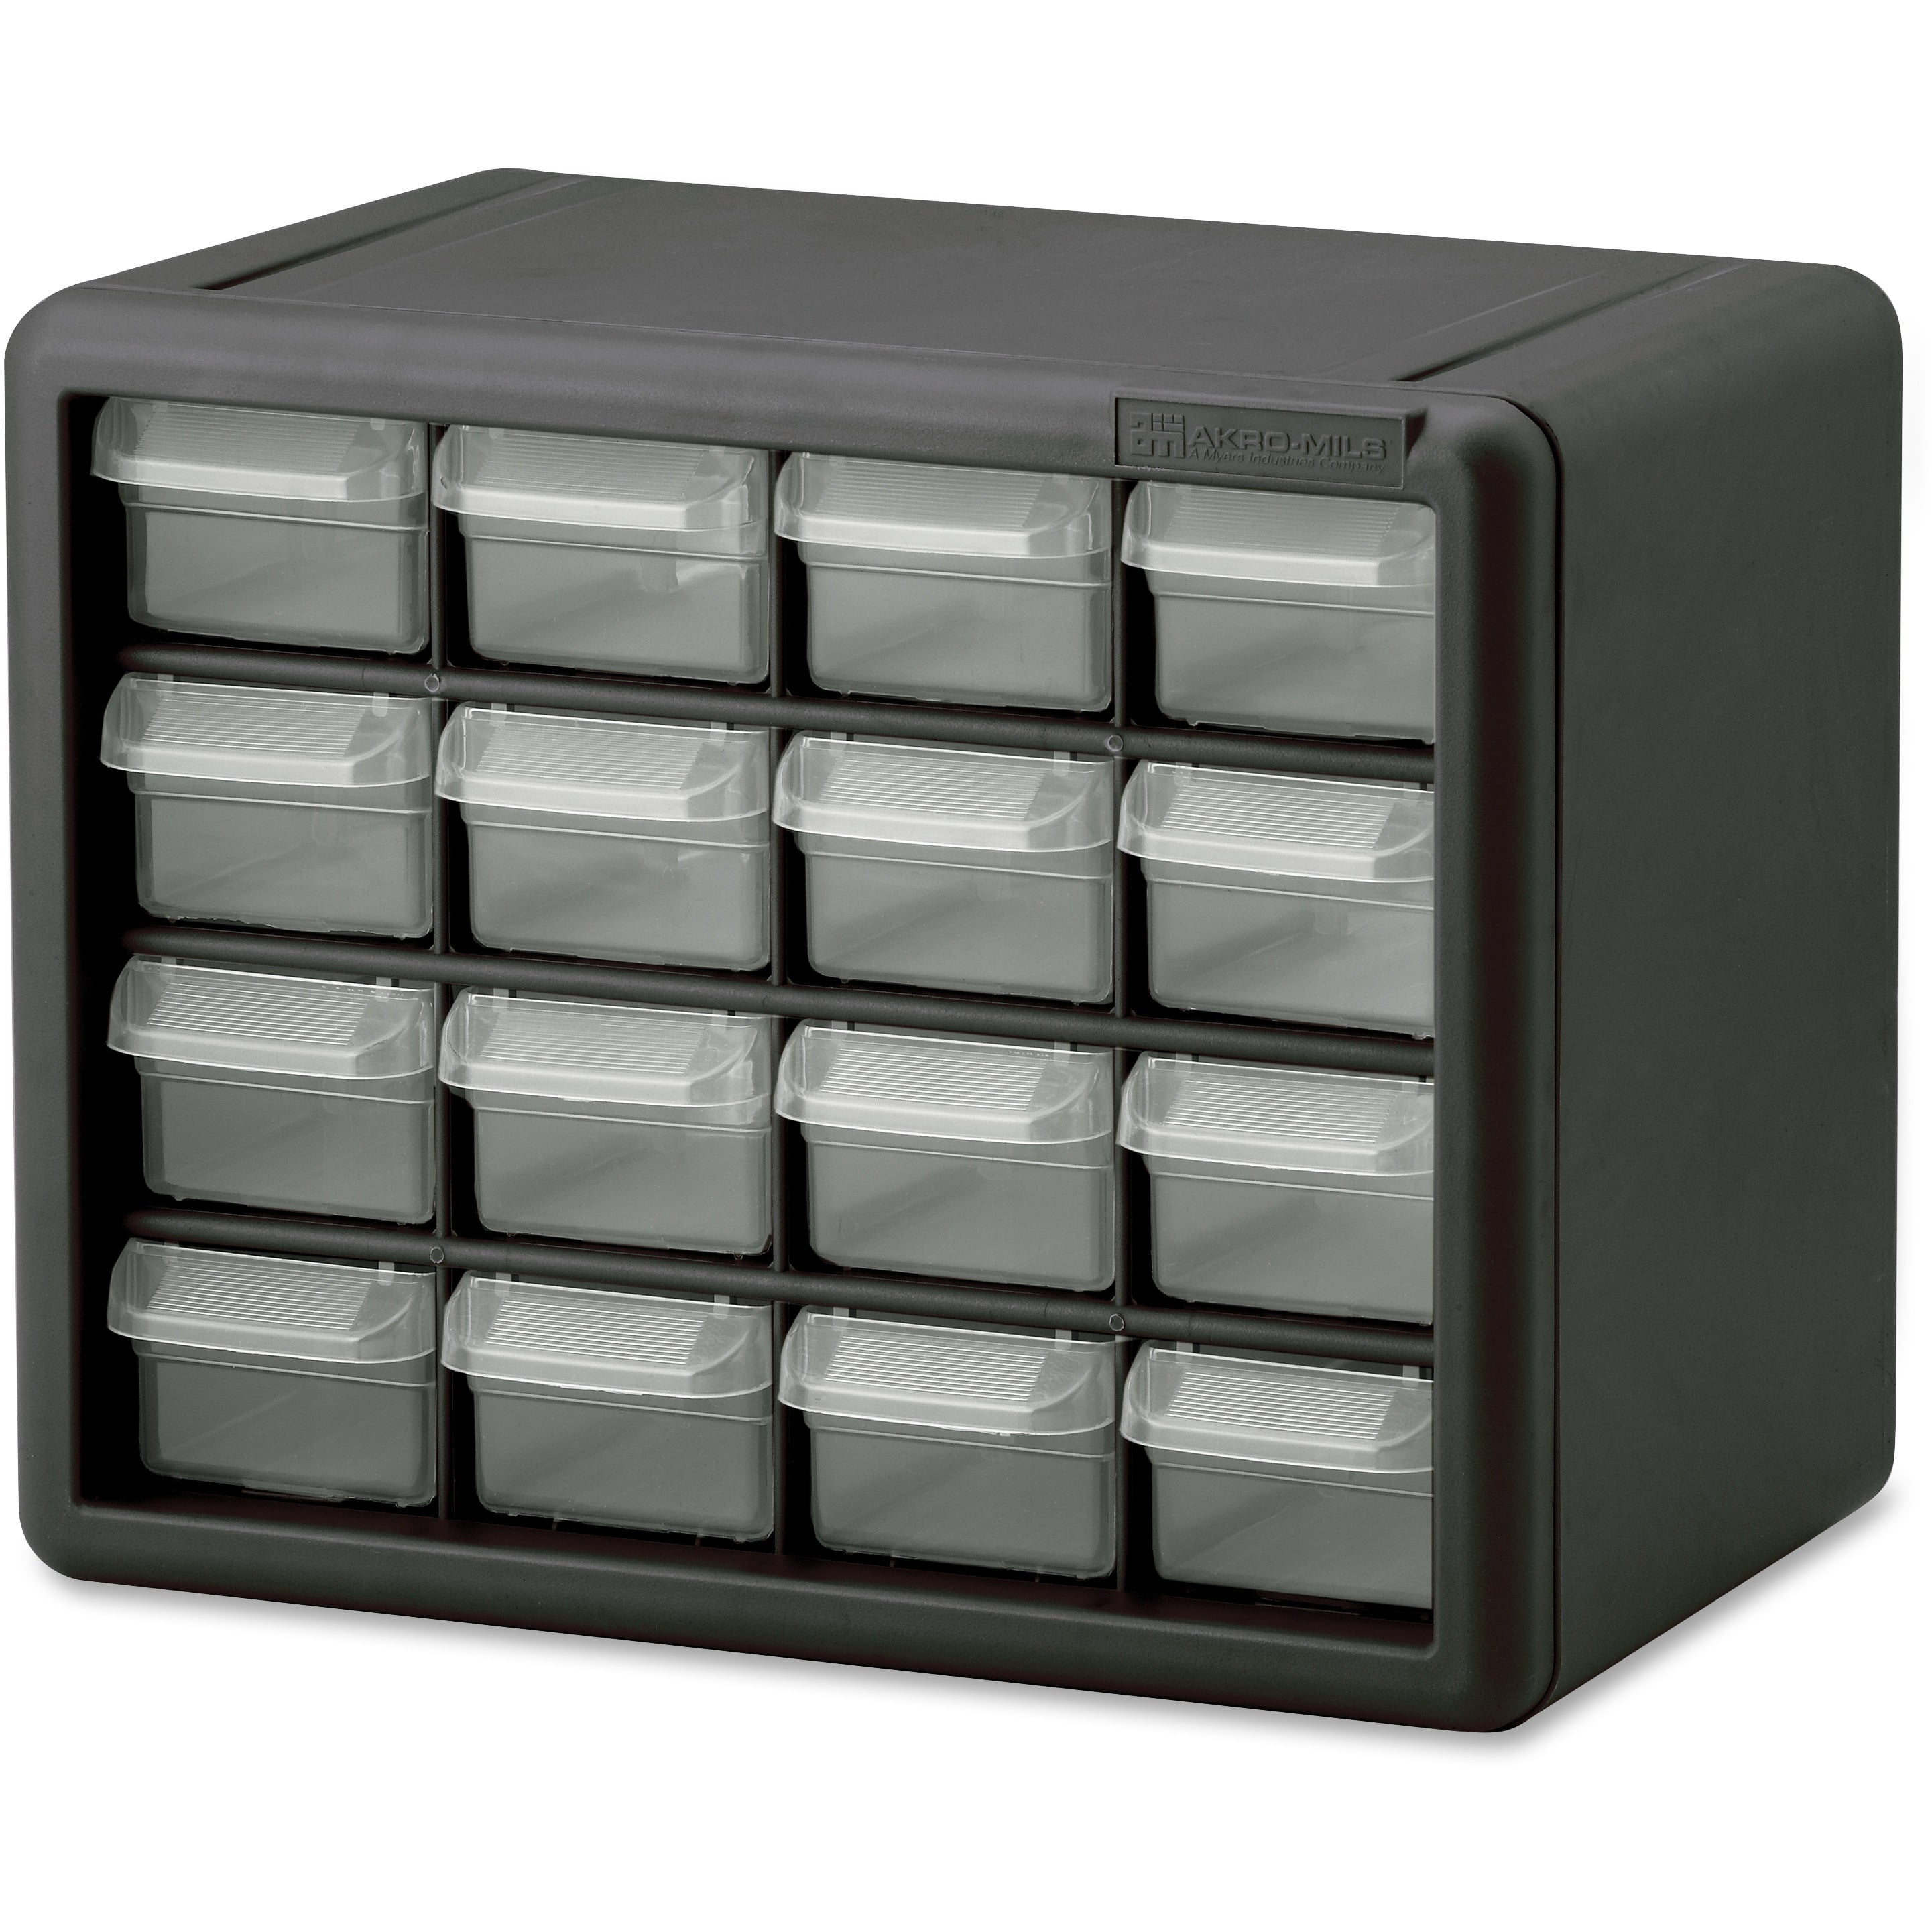  Storage Cabinet With Plastic Drawers for Large Space